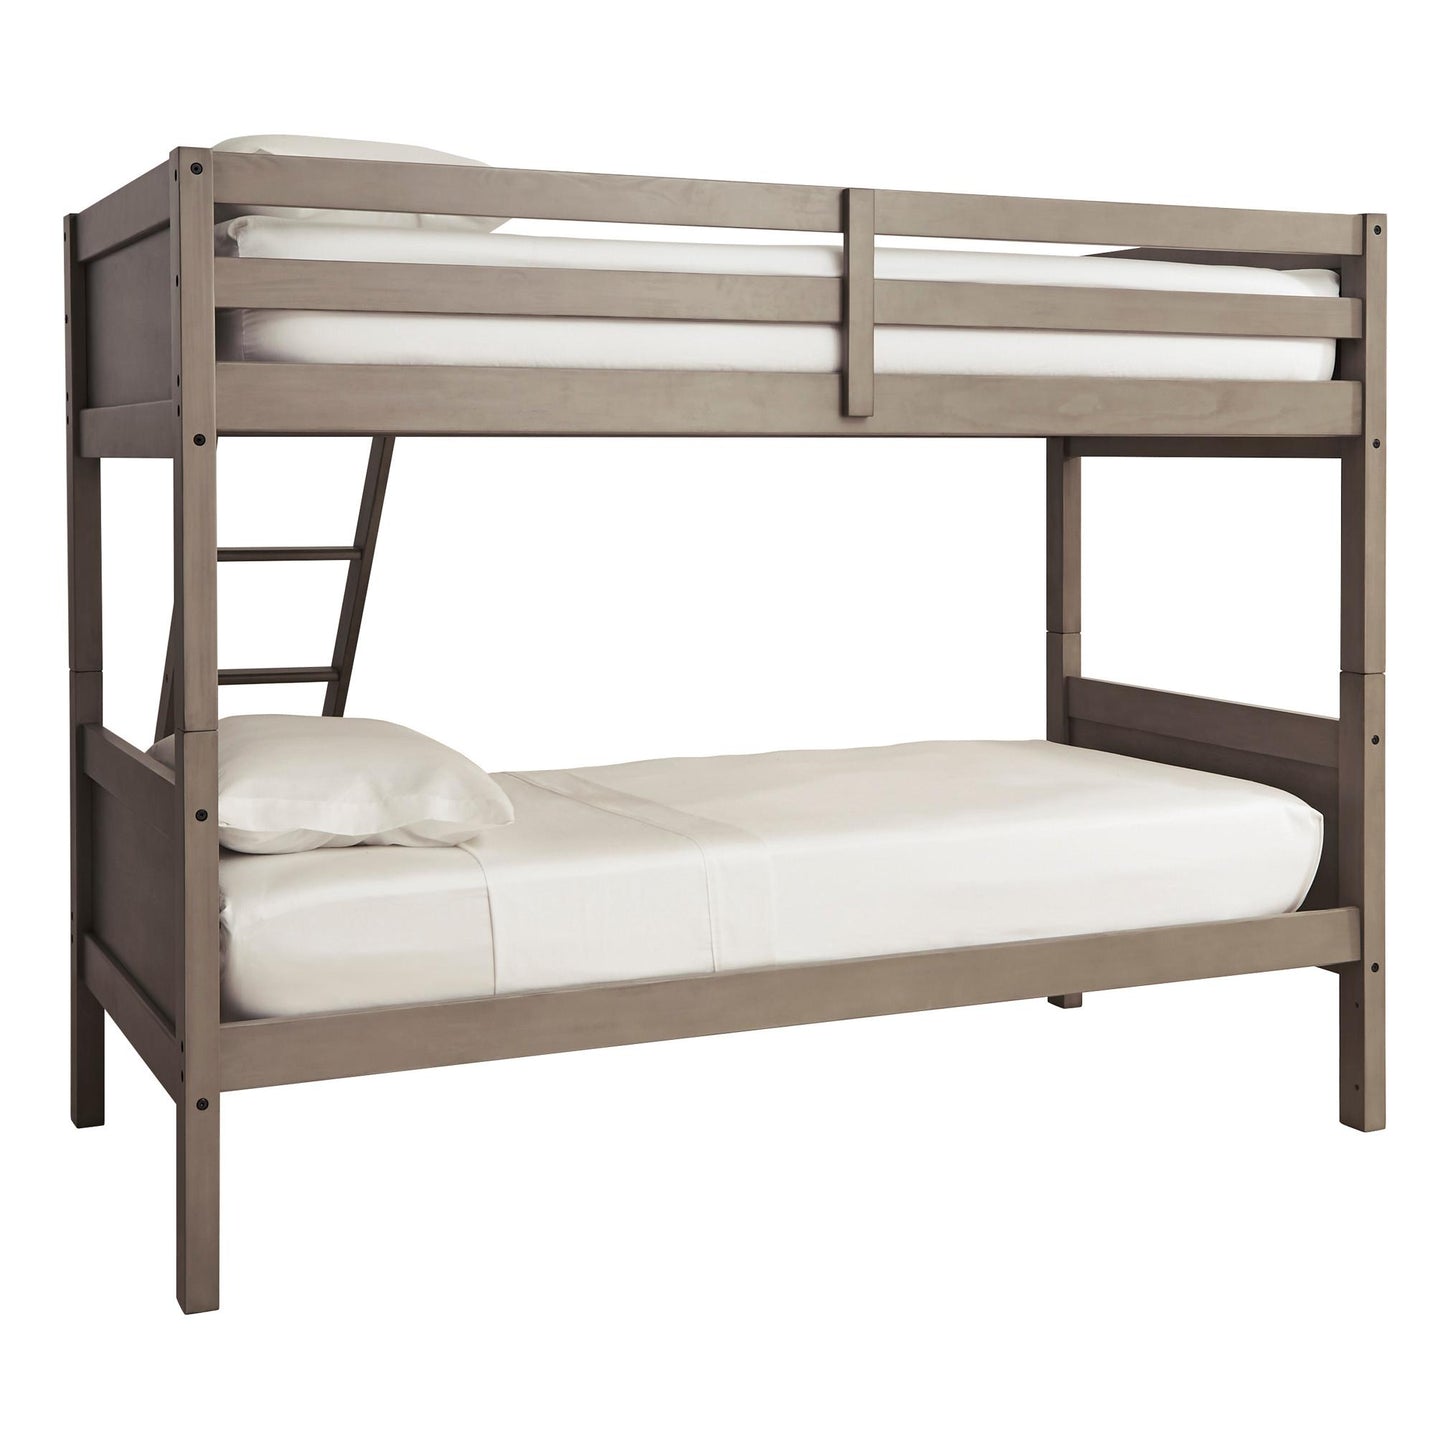 Signature Design by Ashley Kids Beds Bunk Bed B733-59 IMAGE 4